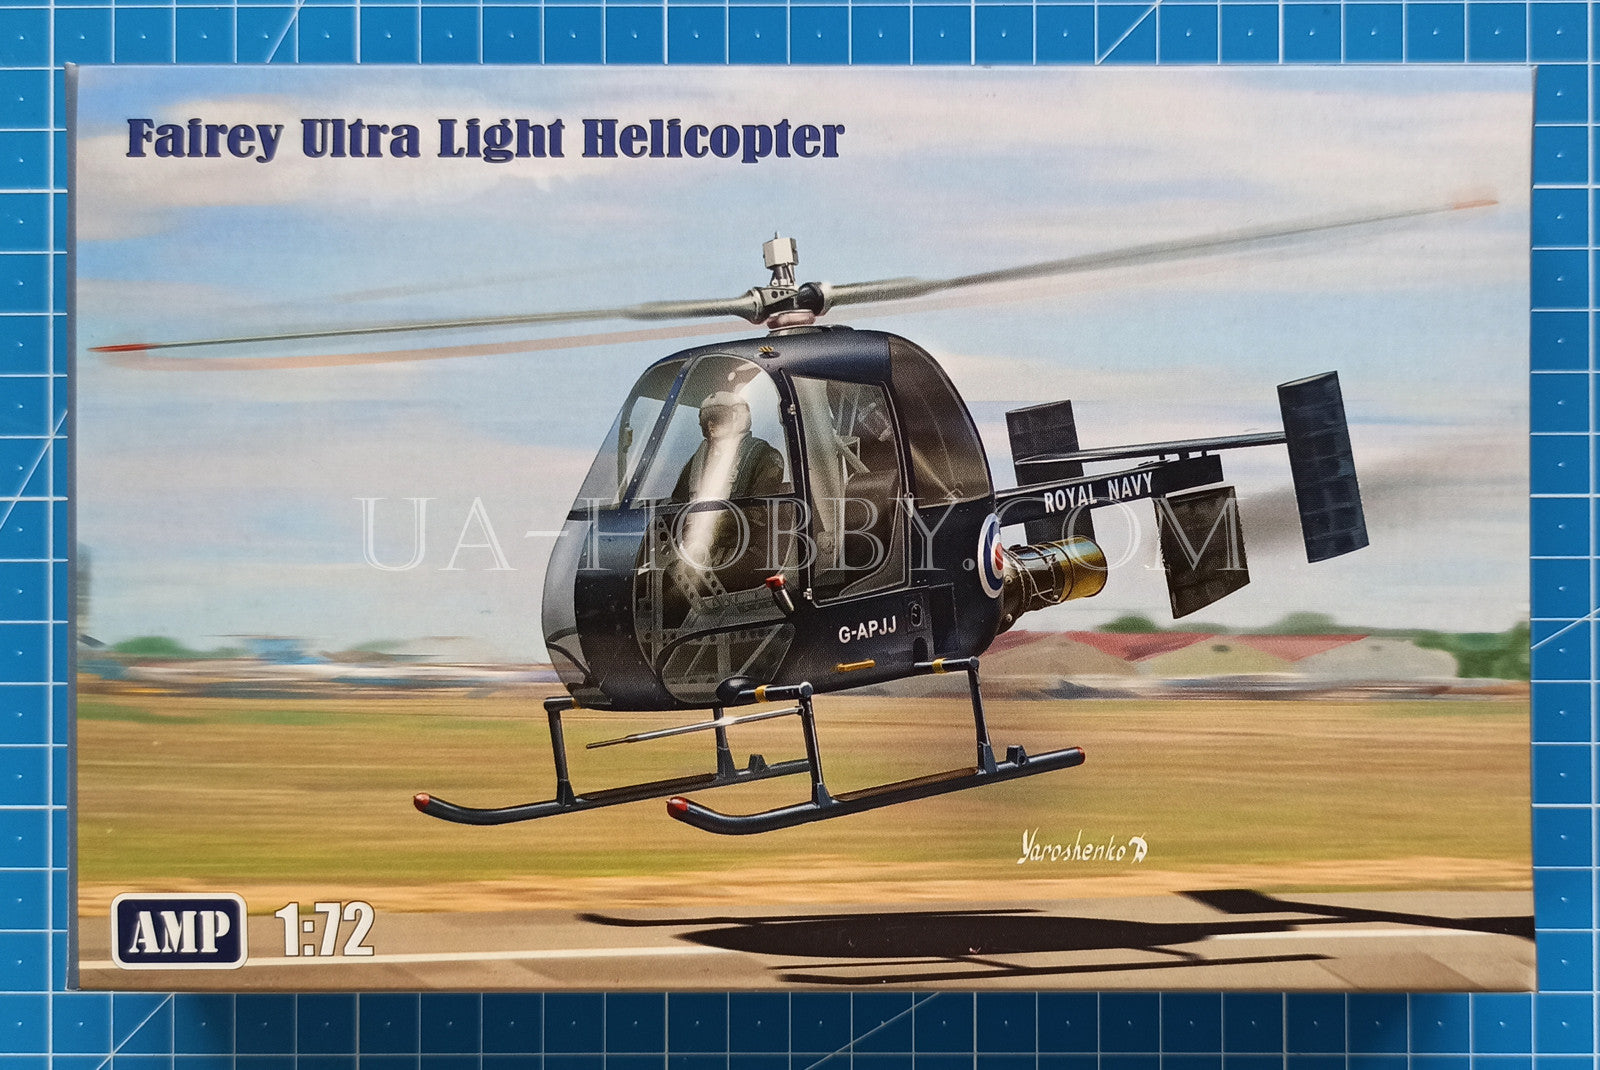 1/72 Fairey Ultra-Light Helicopter. AMP 72002